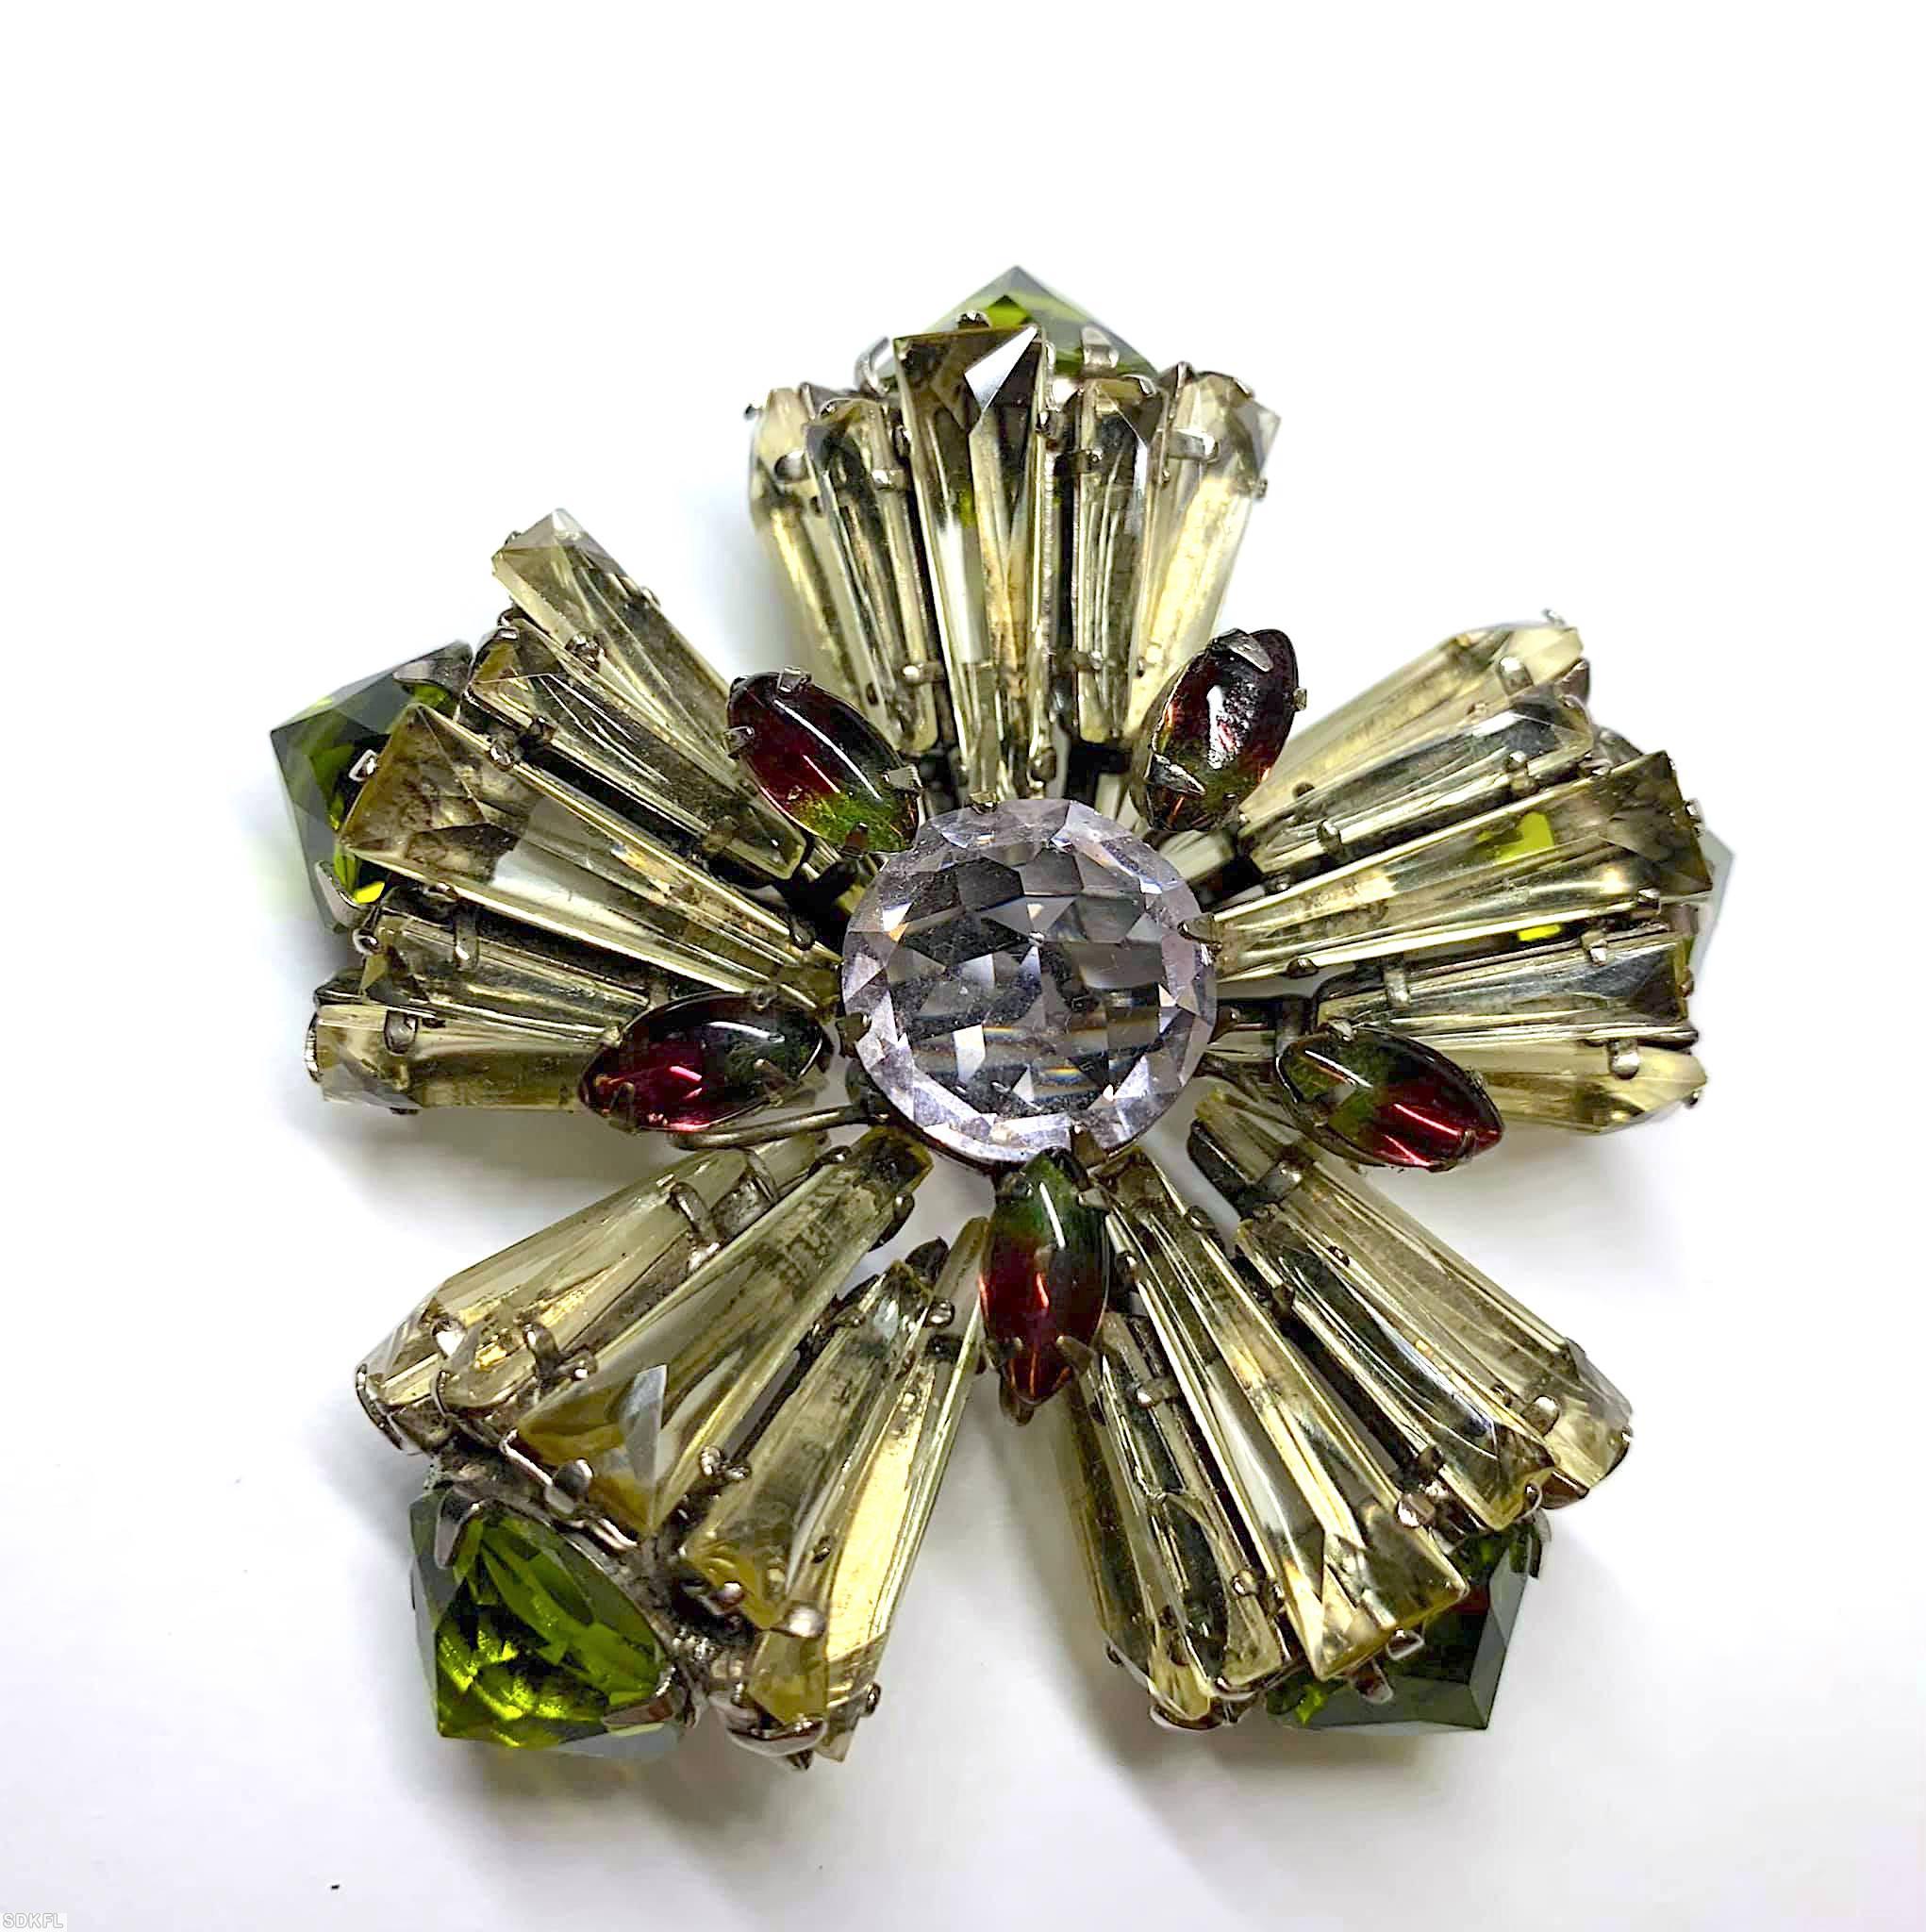 Schreiner 5 petal keystone radial 2 level pin pointy stone end faceted chaton center 5 navette top level champagne glass keystone peridot large faceted inverted bi color ruby green navette large faceted round center stone jewelry